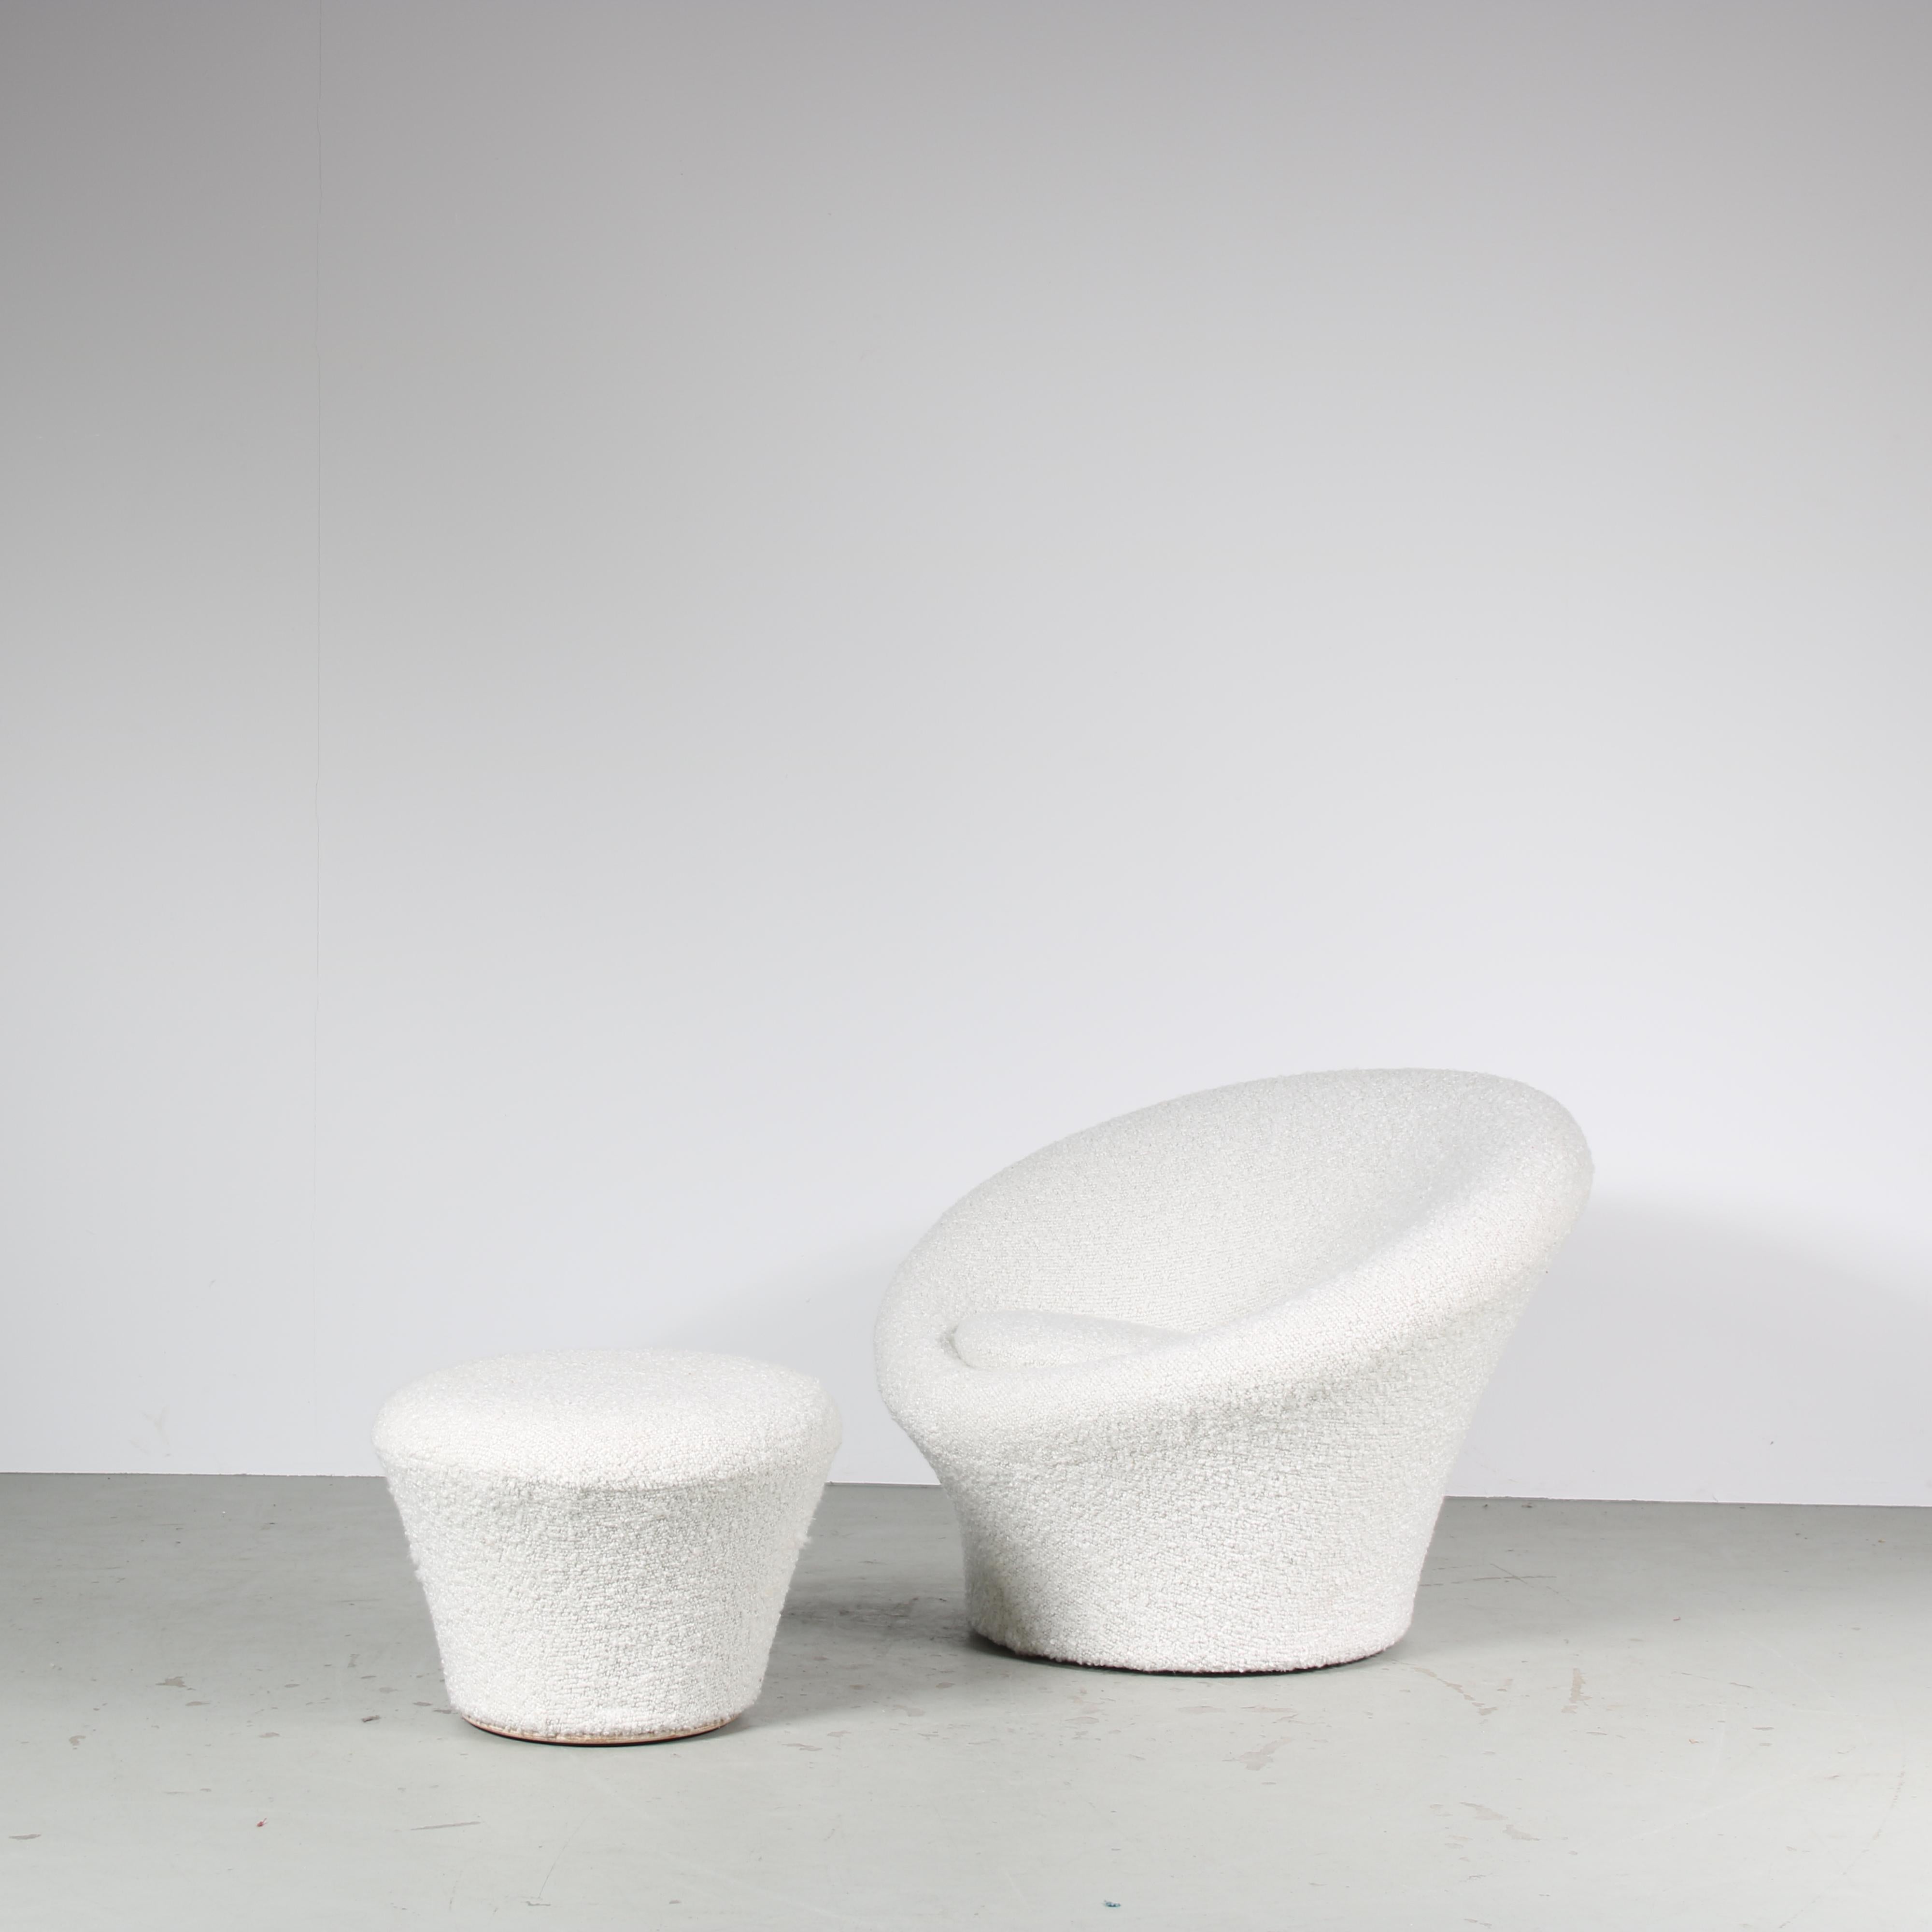 A beautiful “Mushroom” chair with matching pouf, designed by Pierre Paulin and manufactured by Artifort in the Netherlands around 1960.

This iconic piece, model 560, is a highly recognizable piece of mid-century design! The large, rounded seat